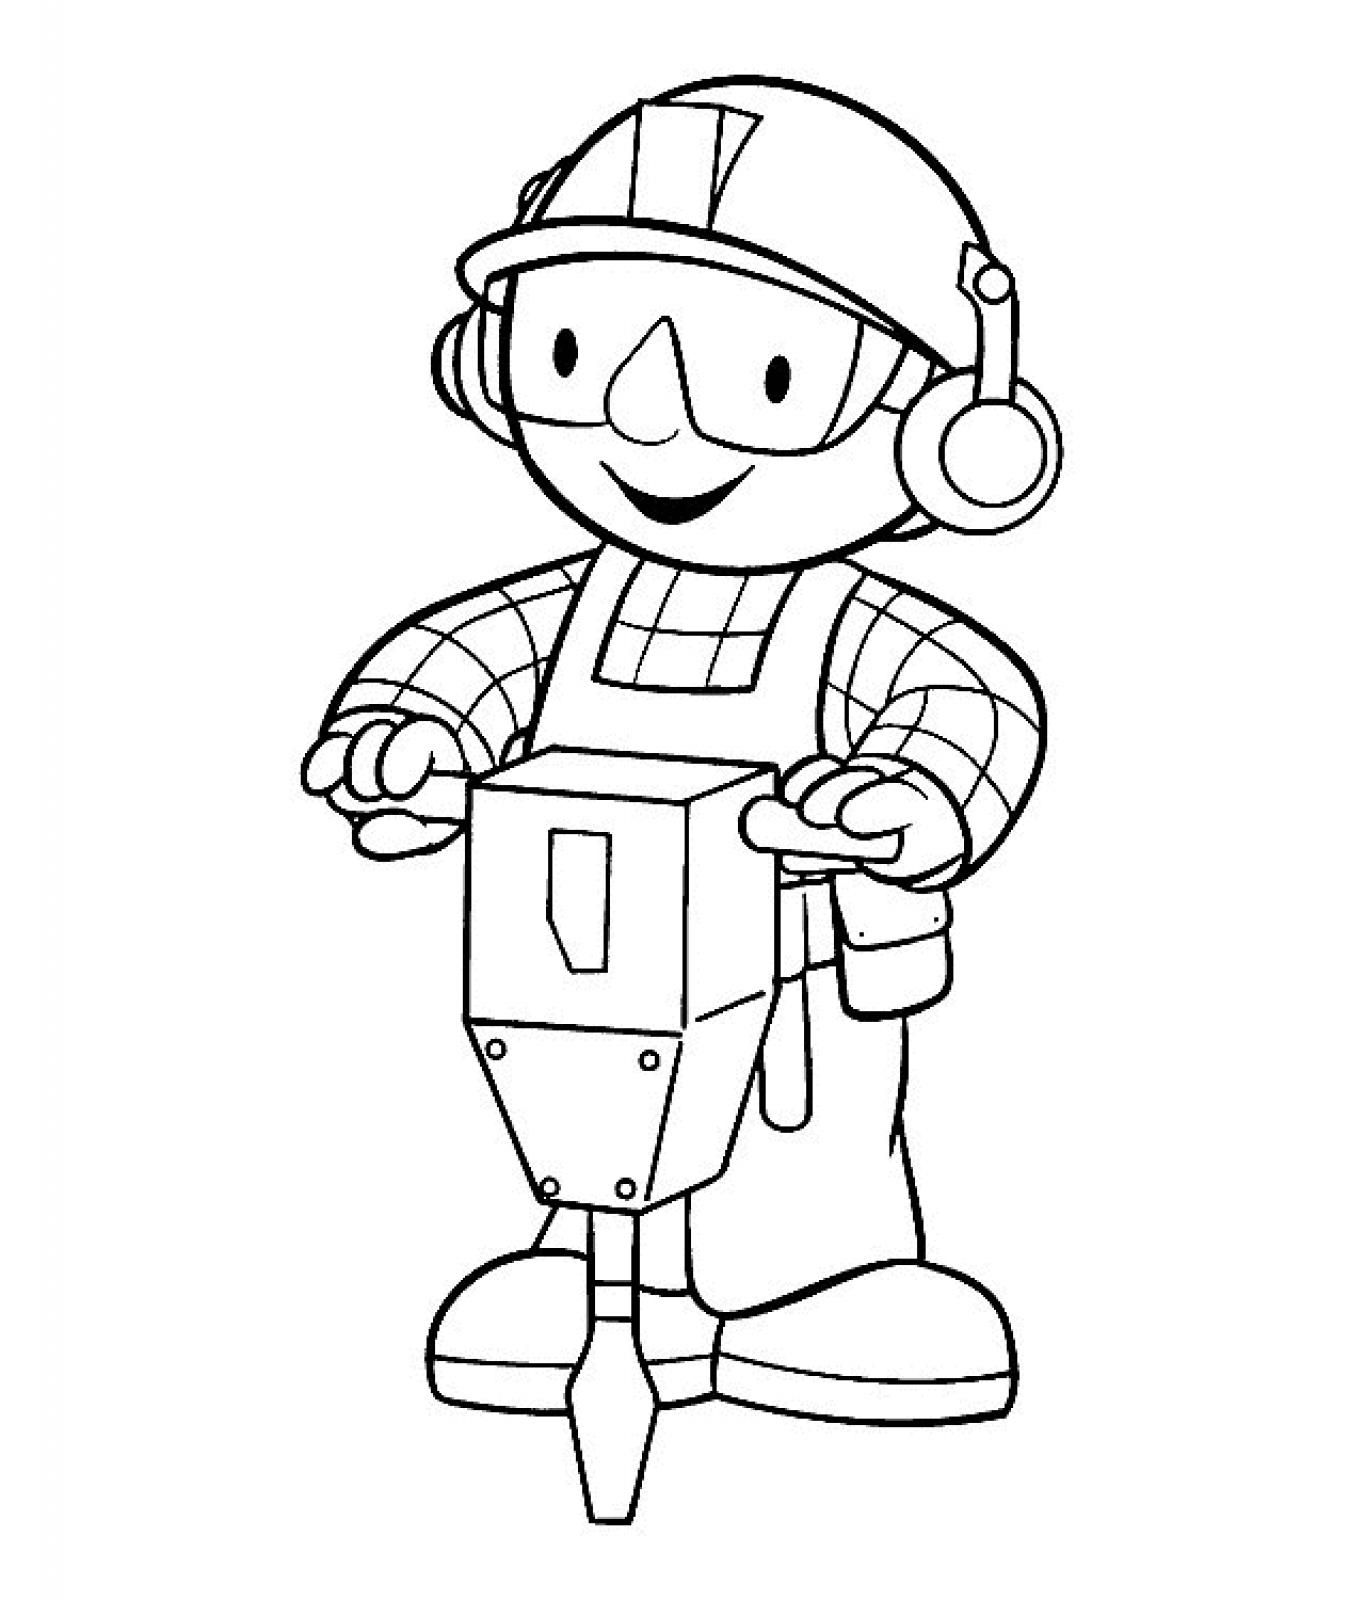 Bob The Builder Coloring Pages Free Page 1